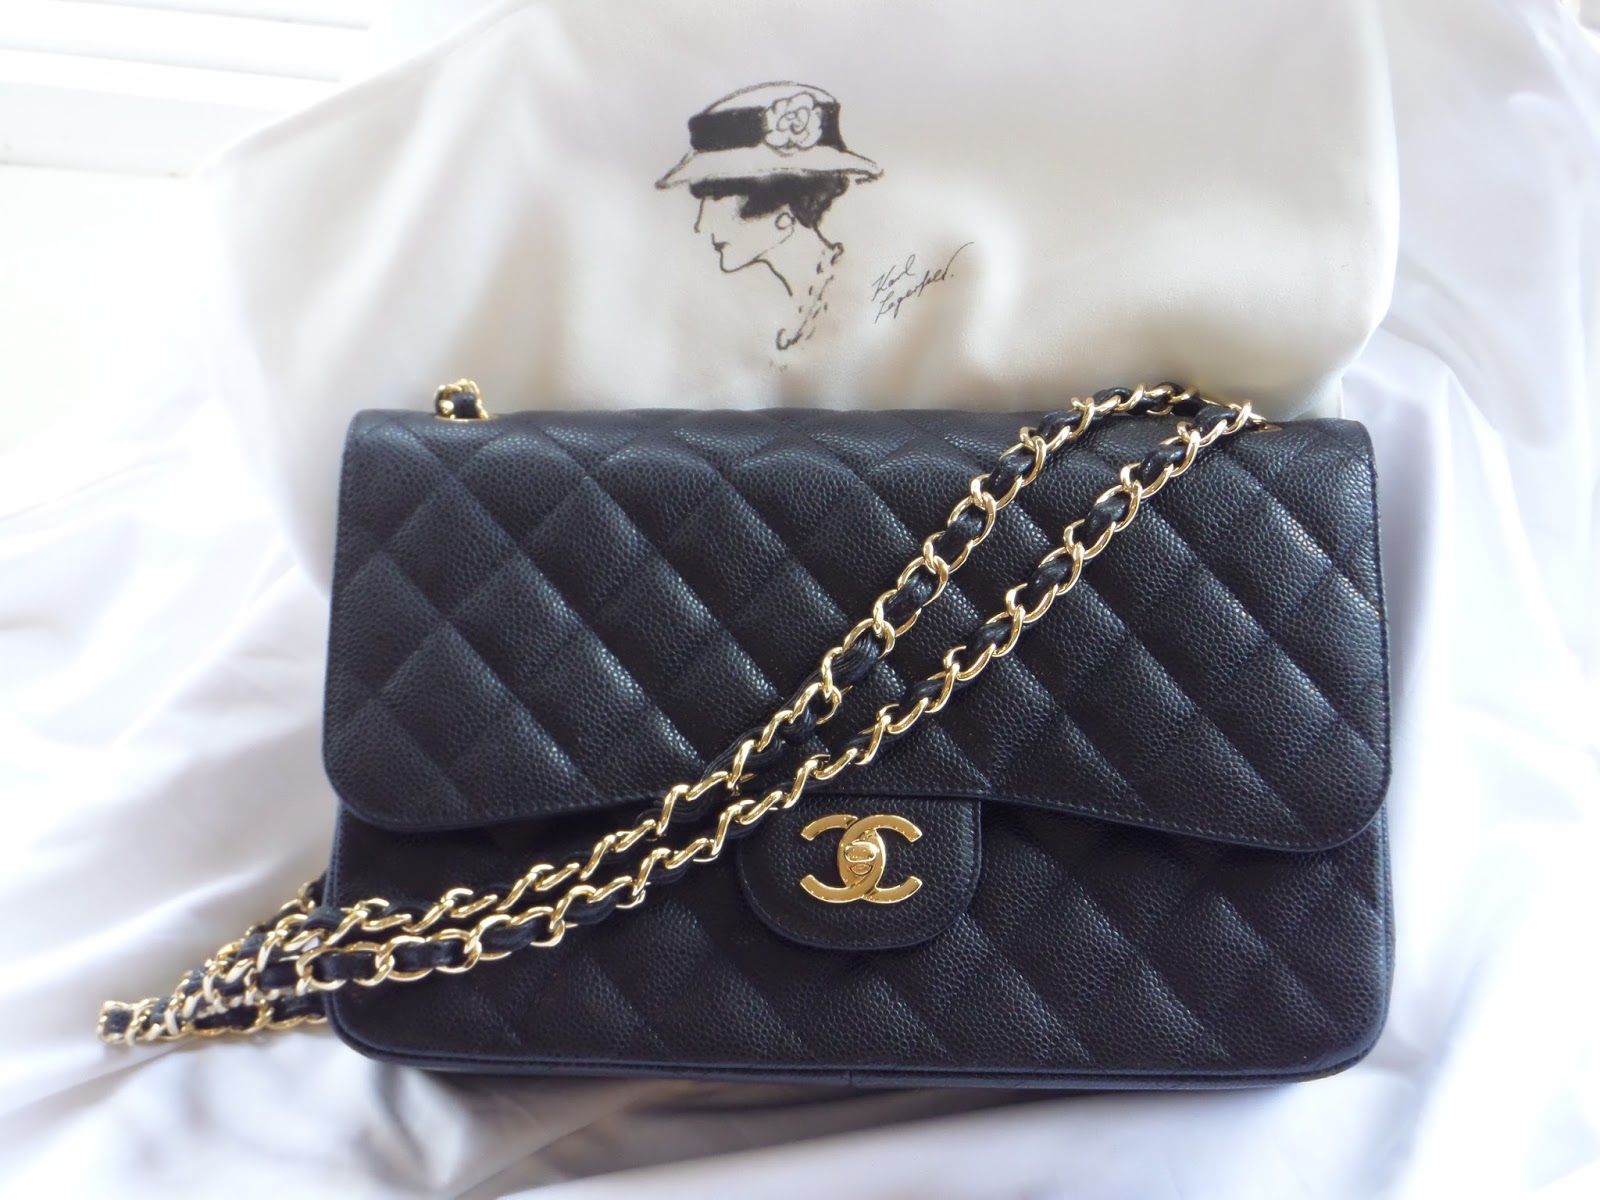 Prada Bags: Chanel Bags On Consignment